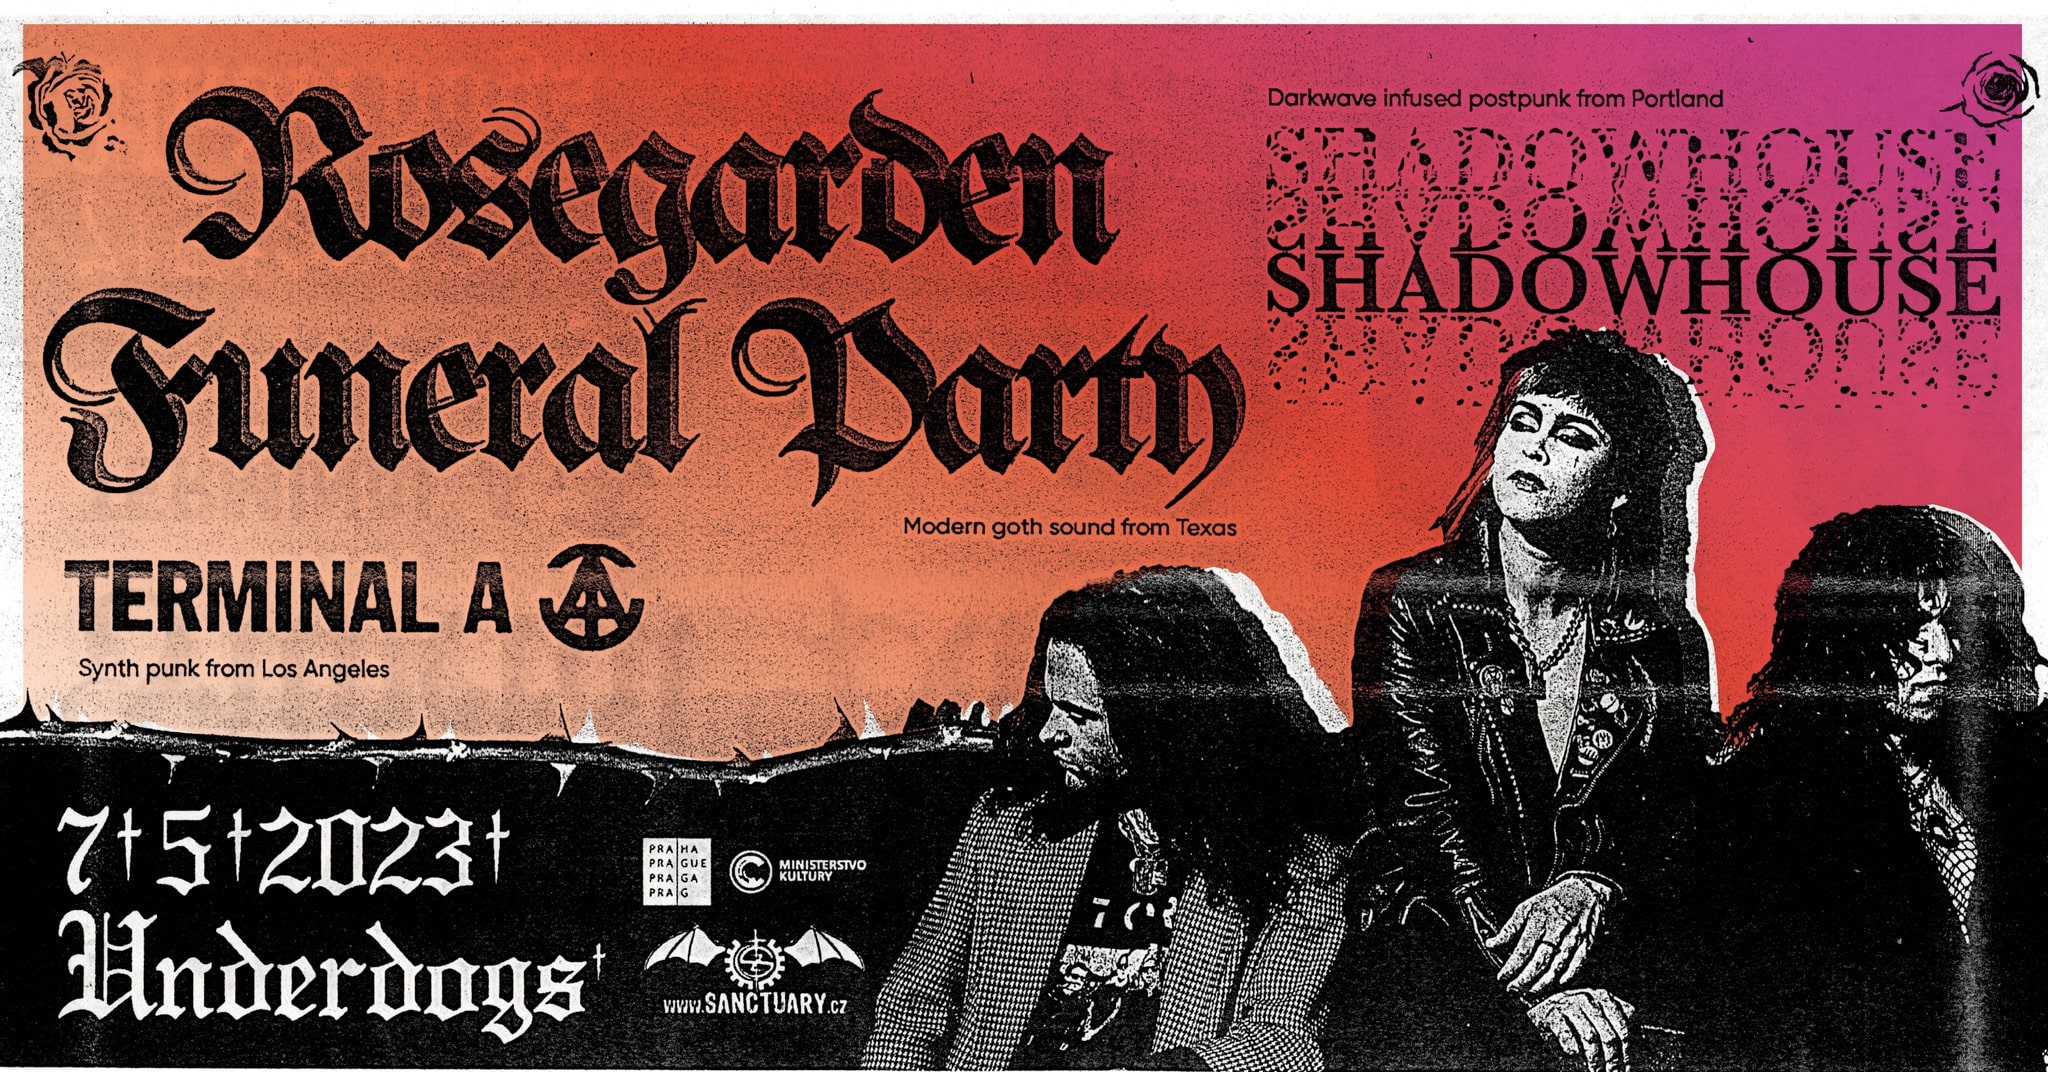 Rosegarden Funeral Party (US) + Shadowhouse (US) + Terminal A (US)